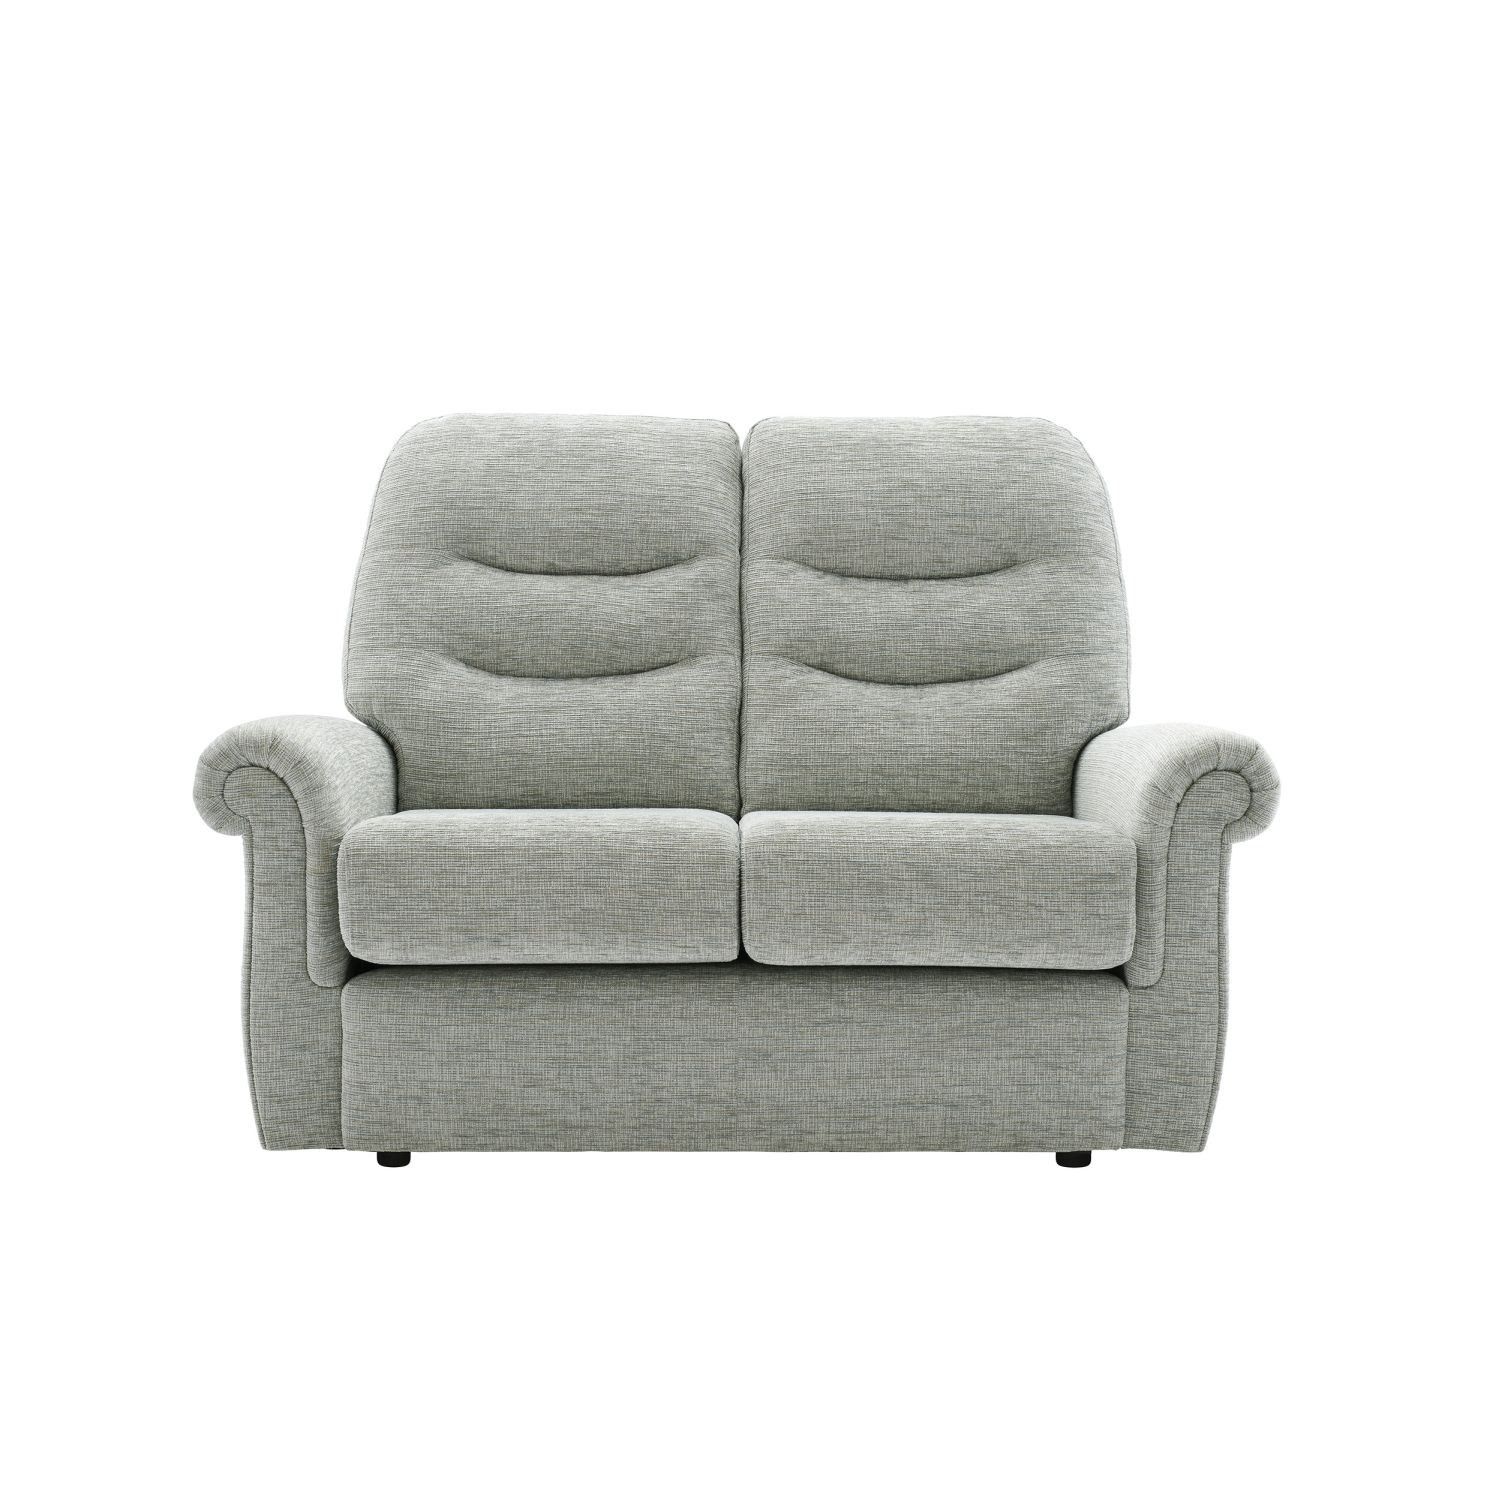 G Plan Holmes Small 2 Seater Fabric Sofa | Leekes Inside Small 2 Seater Sofas (View 6 of 15)